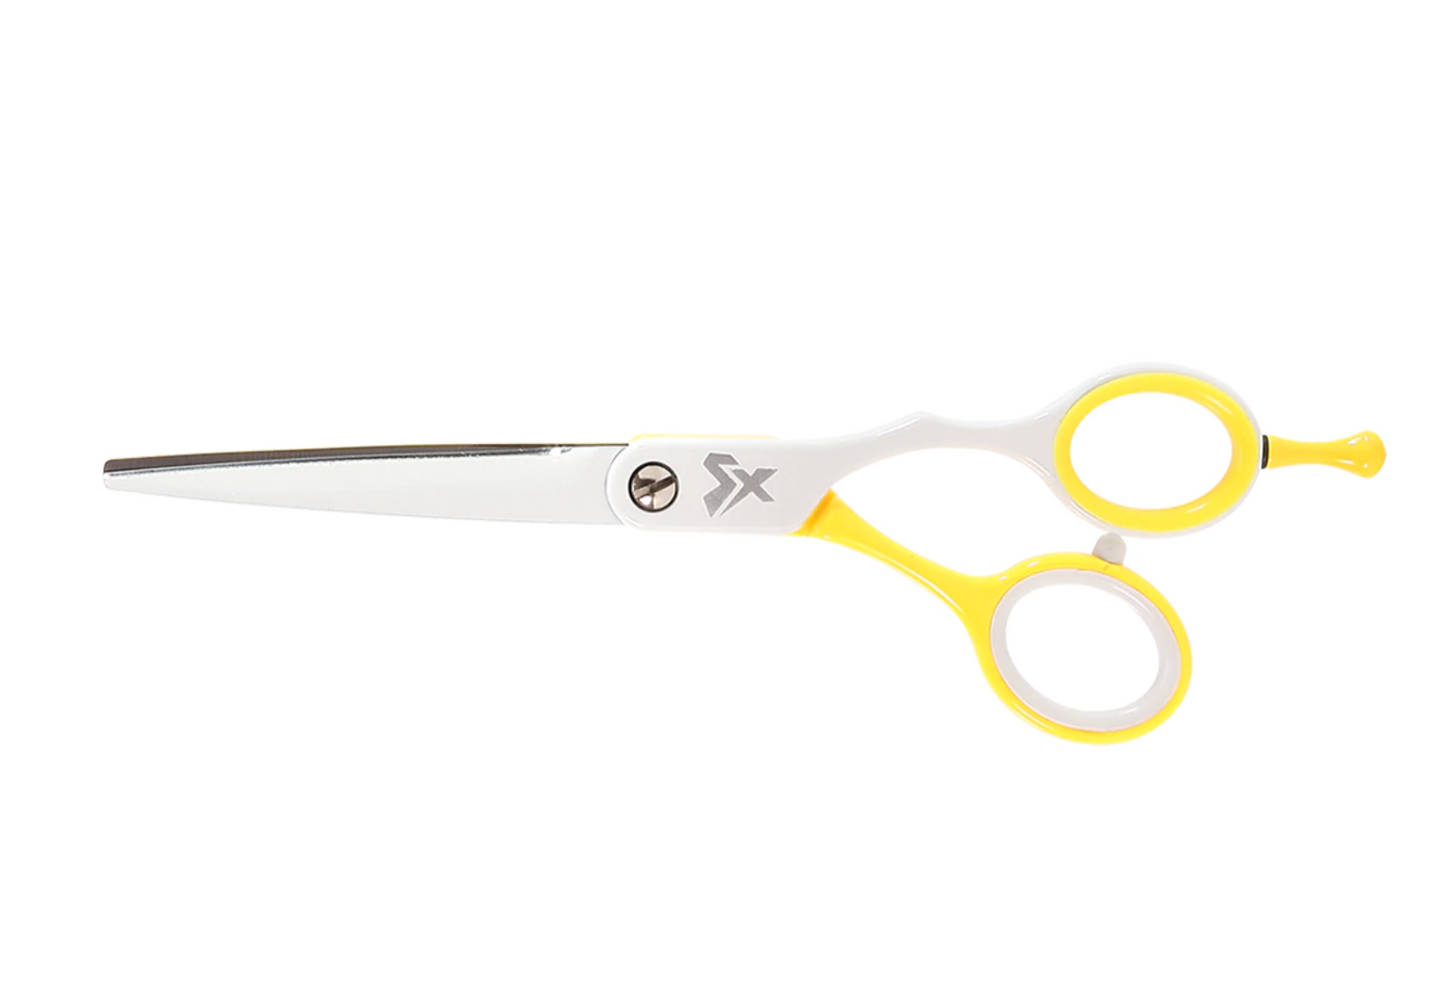 Cricket Hair Scissors Duo 5.75 In. & 32T Hair Shears Thinners – Allegro  Beauty Store